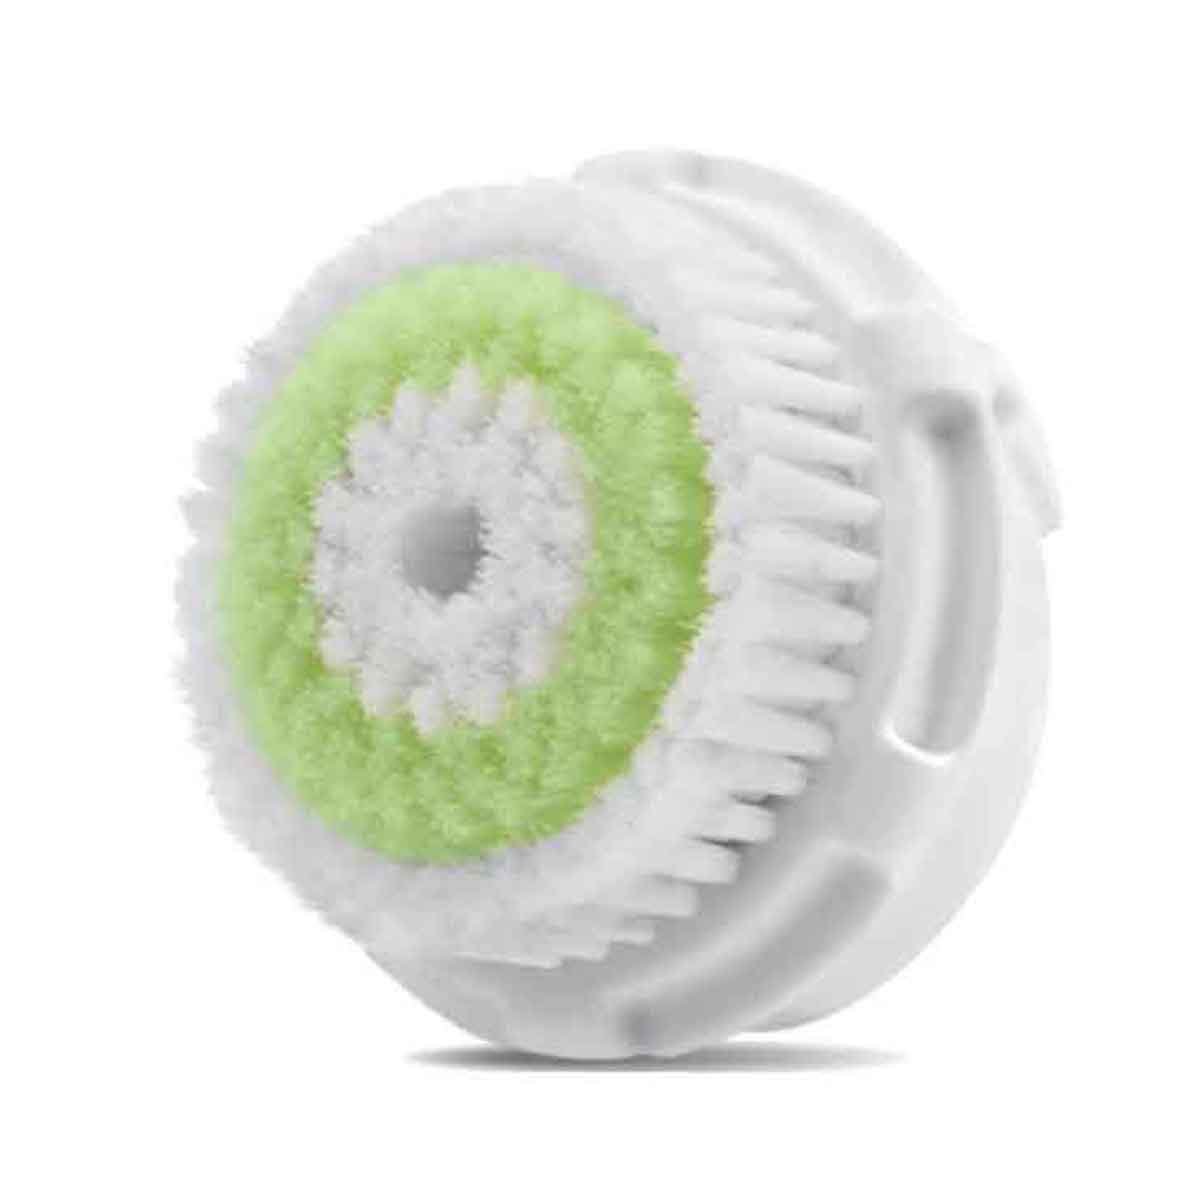 Replacement Brush Heads for Clarisonic Products - Acne Brush Head